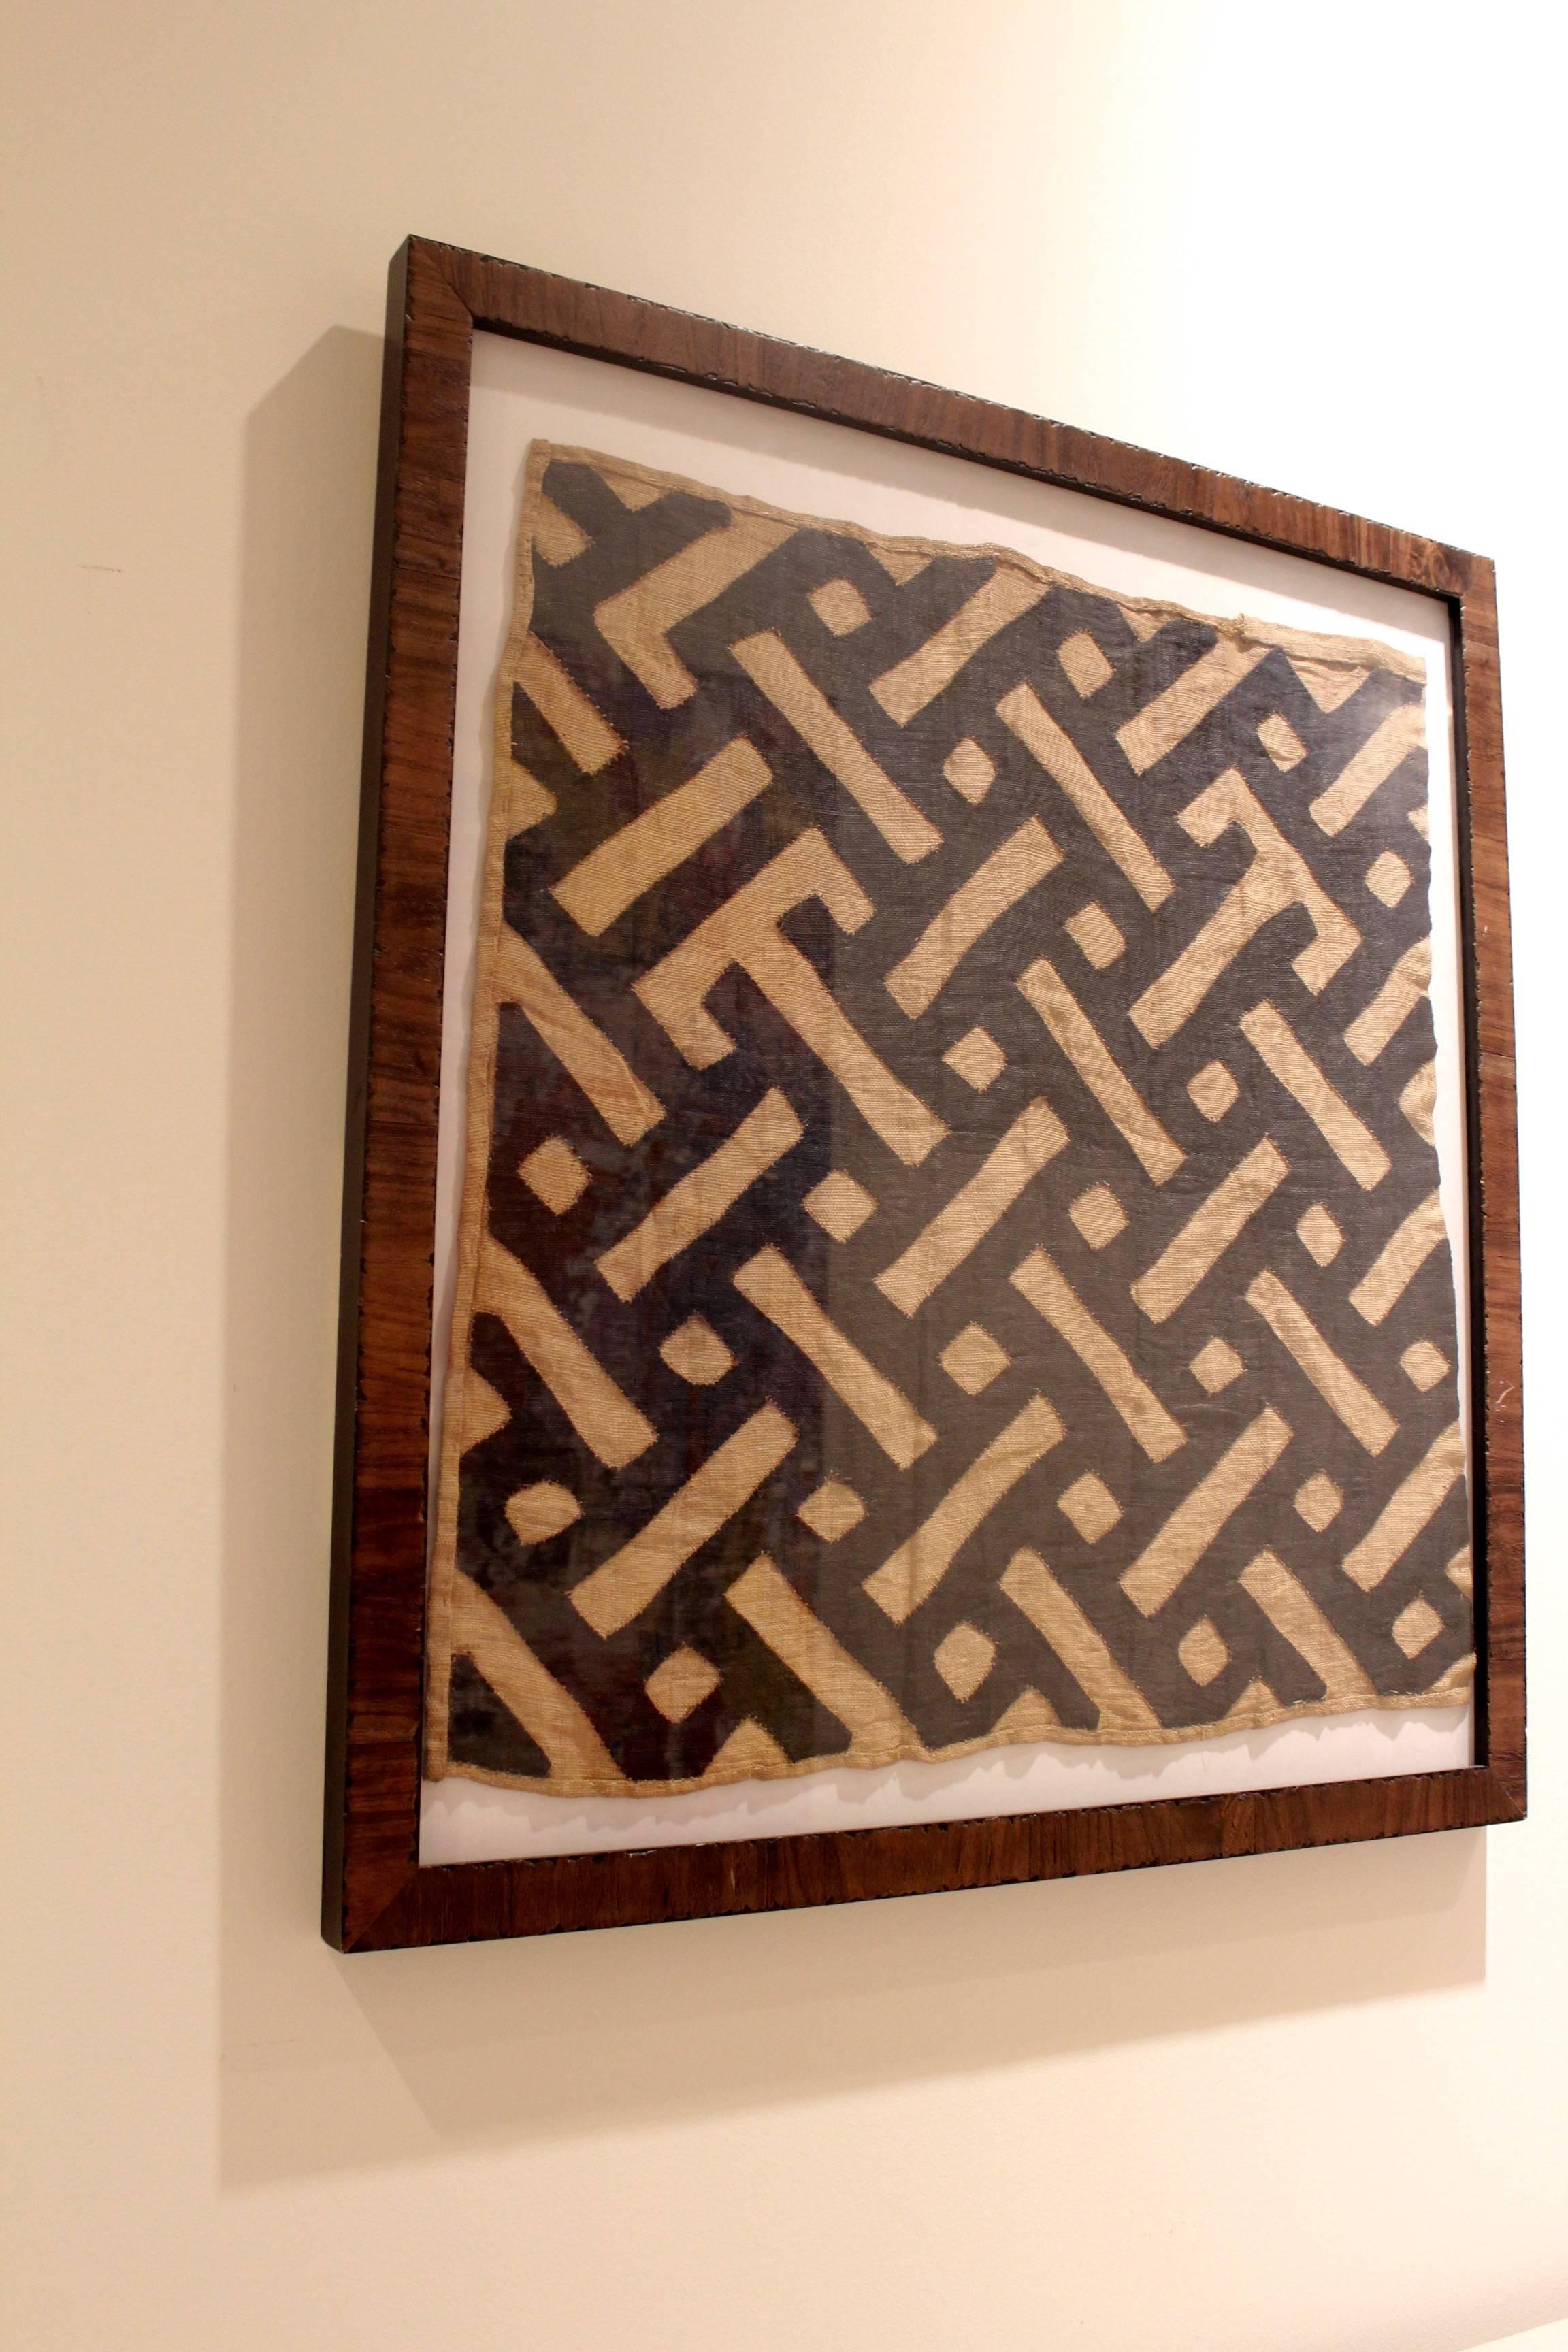 Midcentury Framed African tribal kuba cloth,
 Kuba cloths signify the story making and tribal art of the Congo. Burl walnut frame. 

In Congo culture, the men design and weave the  Kuba cloth, 
made with pieces of  palm leaf fiber. Handwoven